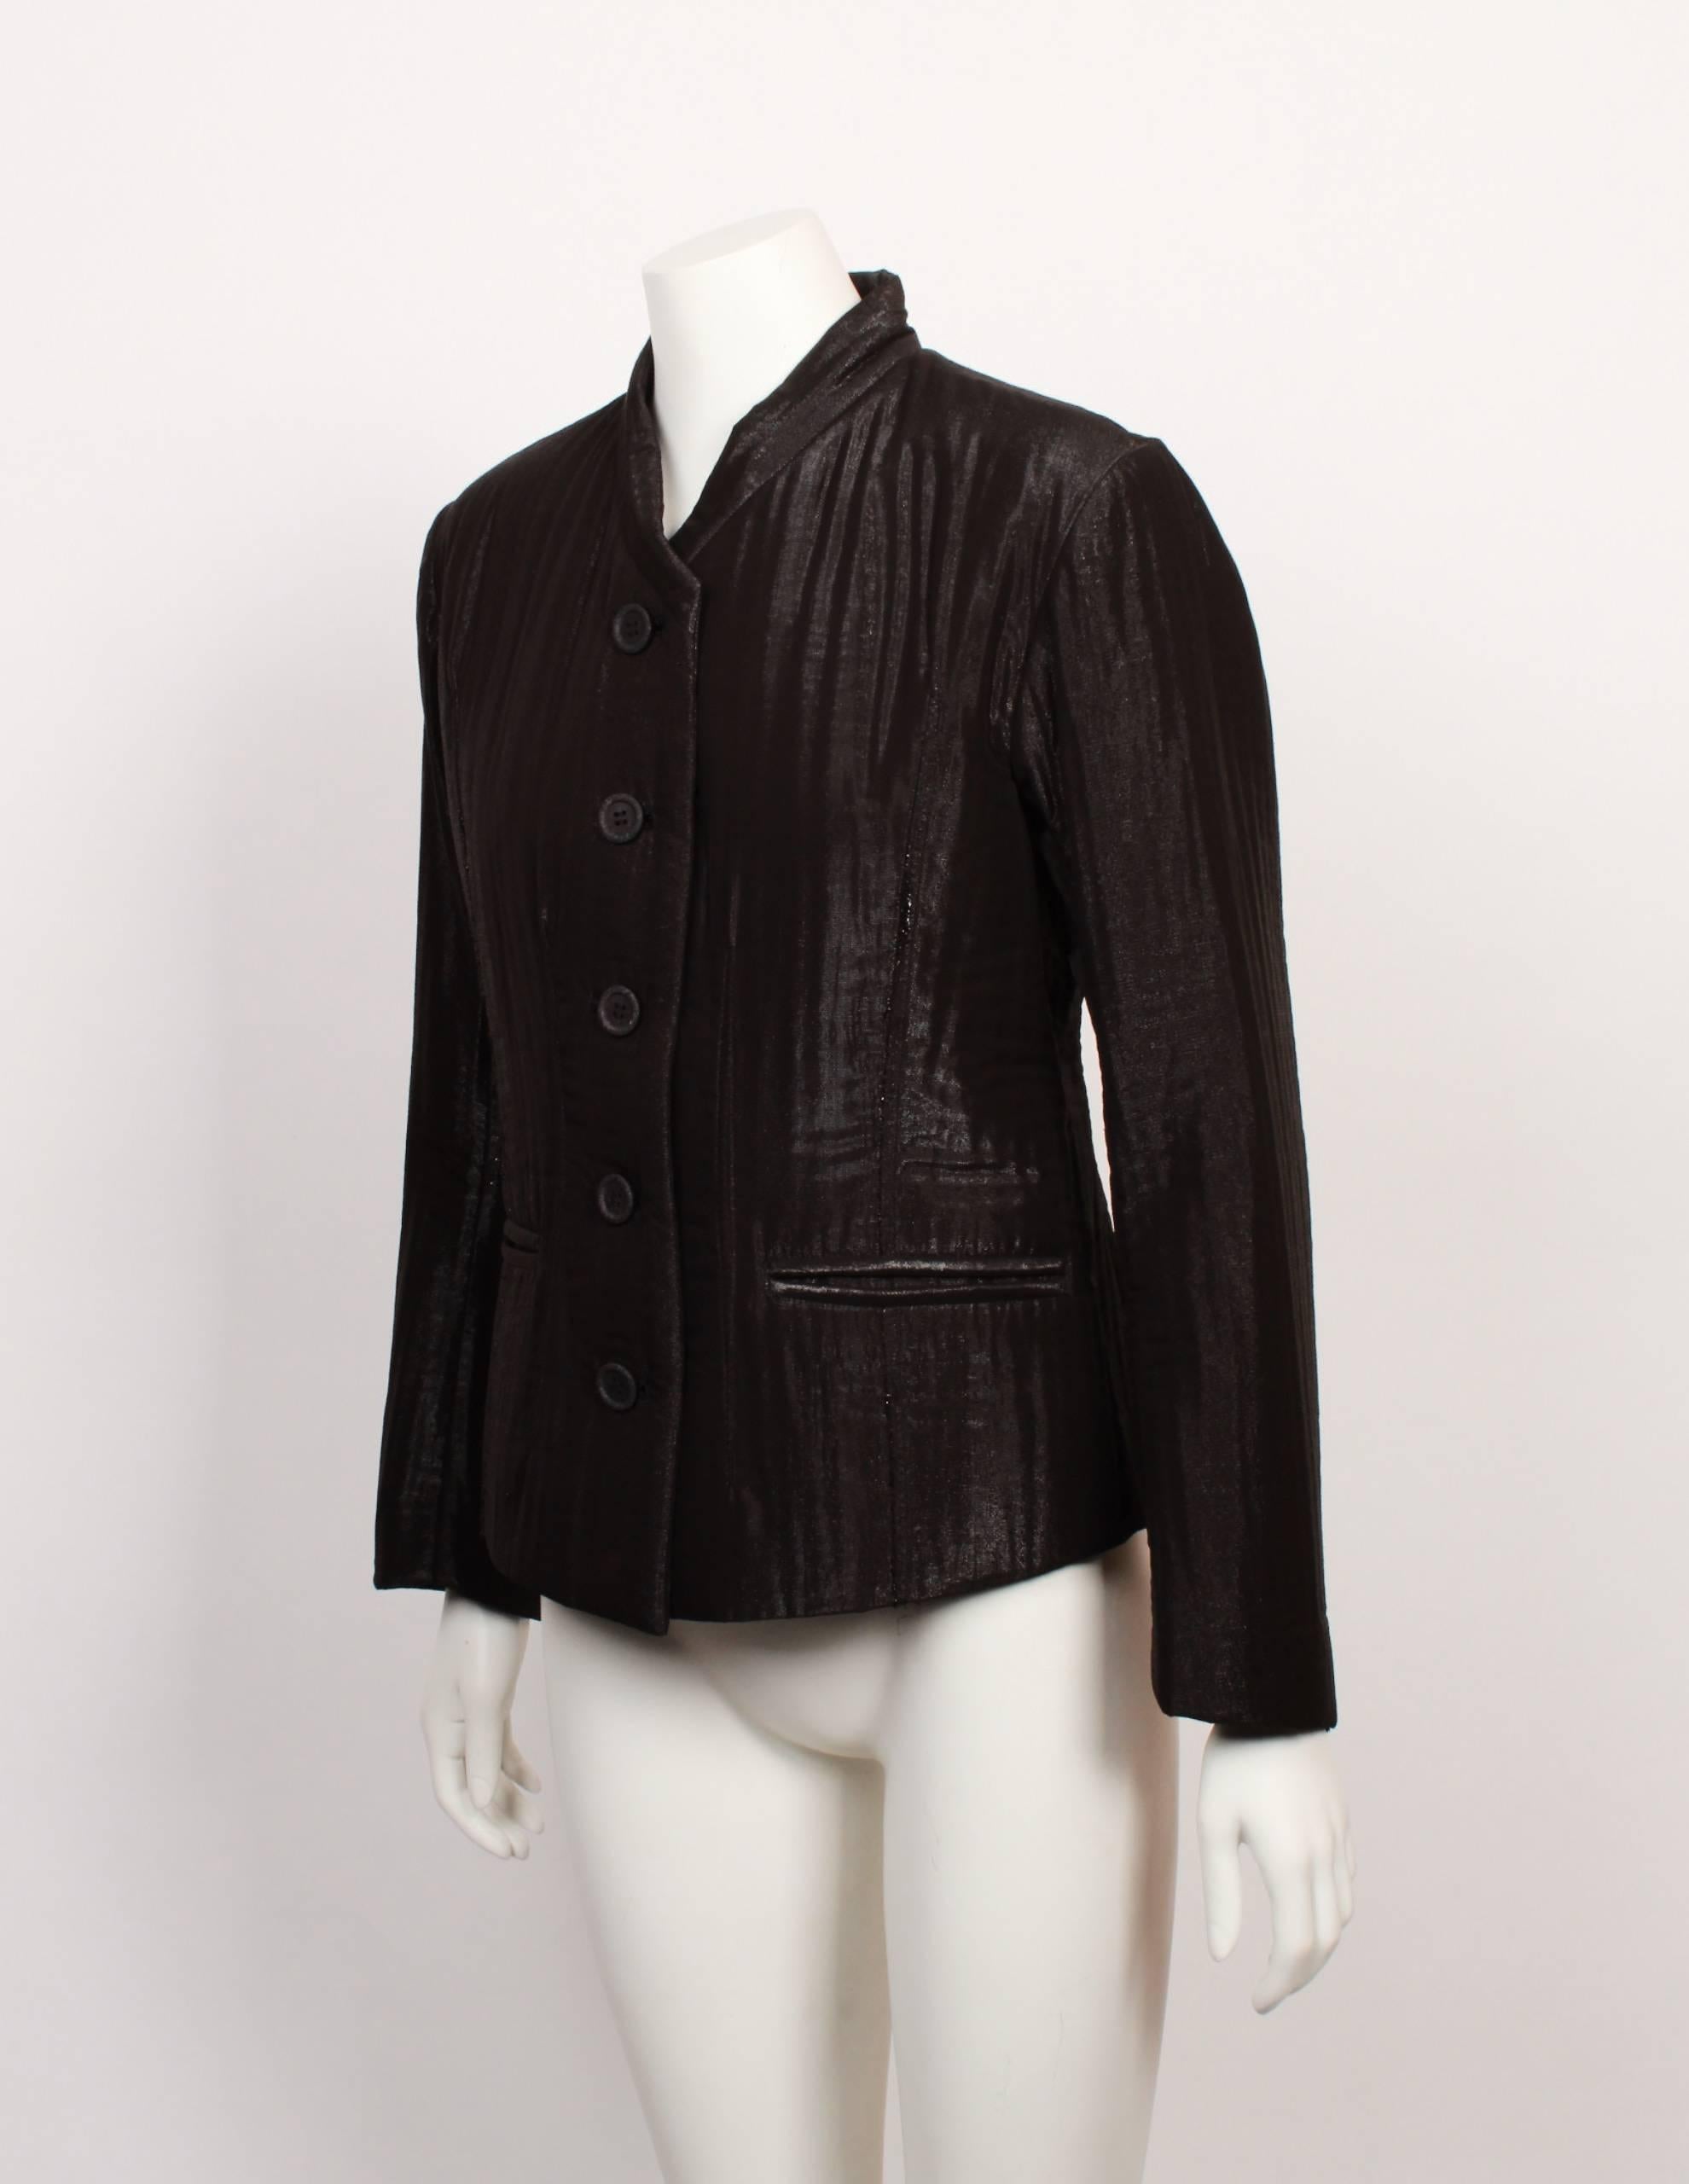 Issey Miyake tailored single breasted jacket with mandarin collar and welt pockets.  Fitted silhouette and constructed from very unusual shot brown fabric that has an almost shimmer effect. 
Made in Japan. Size S